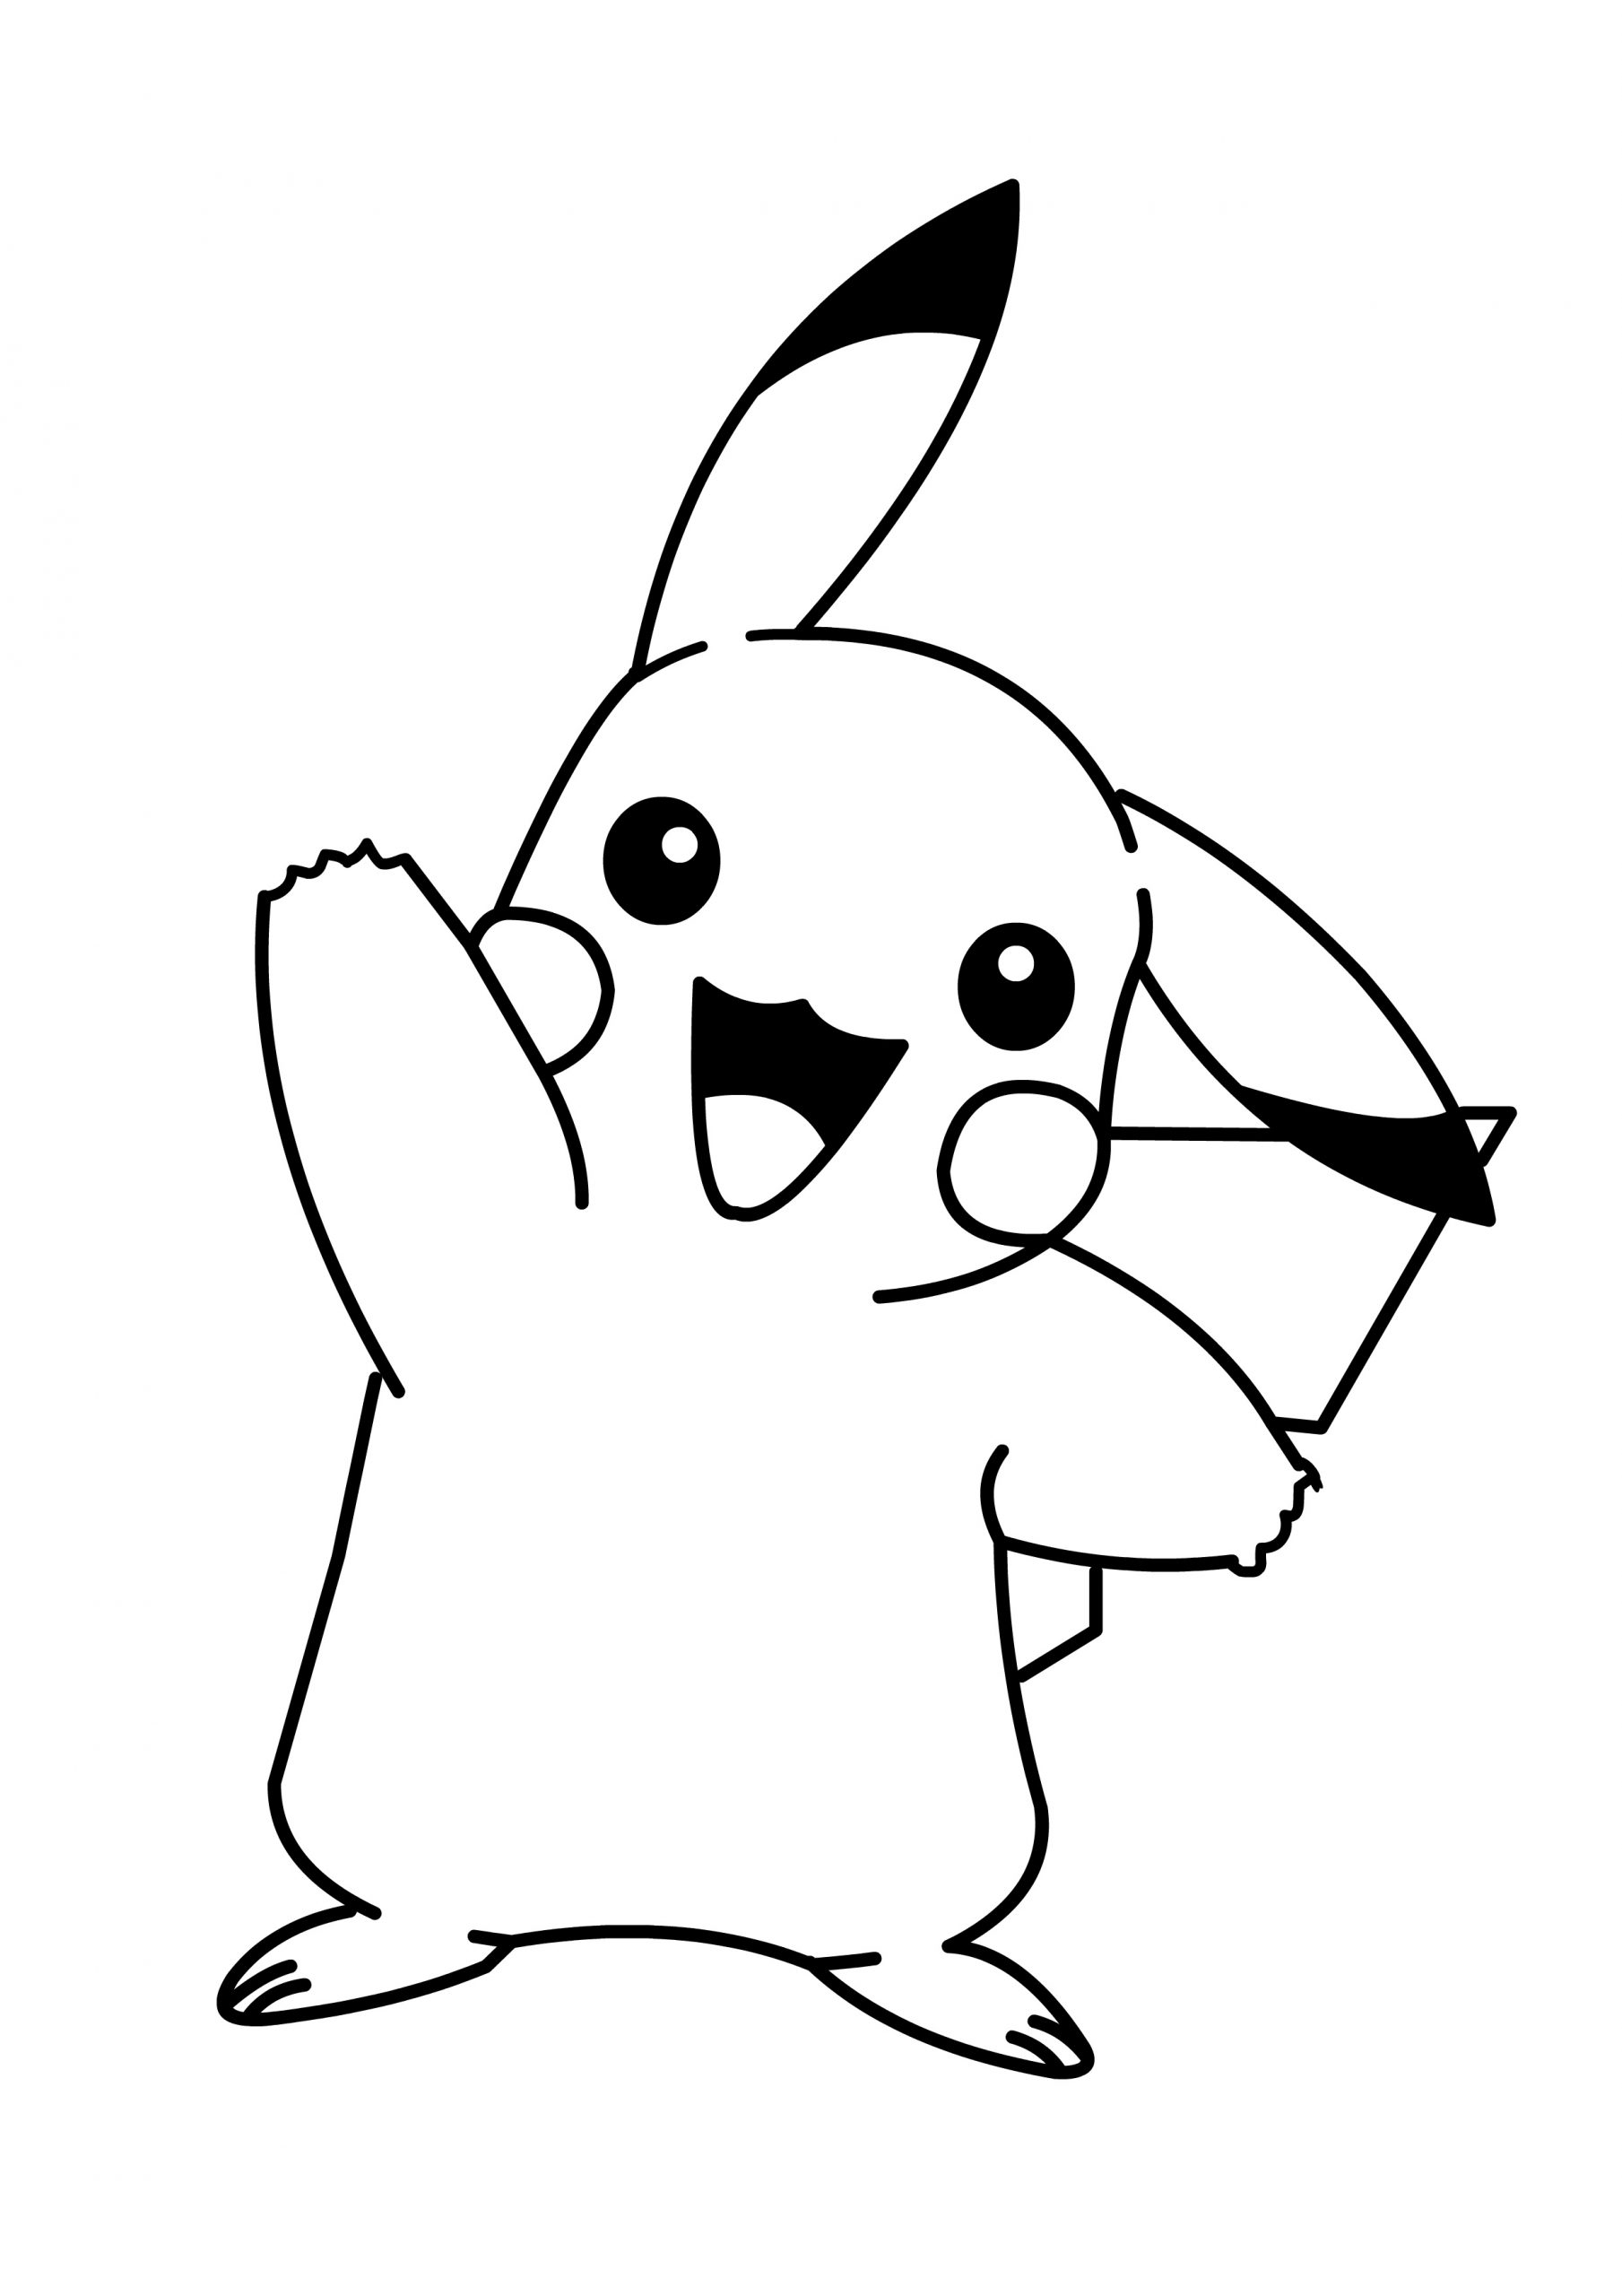 Pokemon Coloring Pages Pikachu Coloring Page Pokemon Coloring My XXX Hot Girl